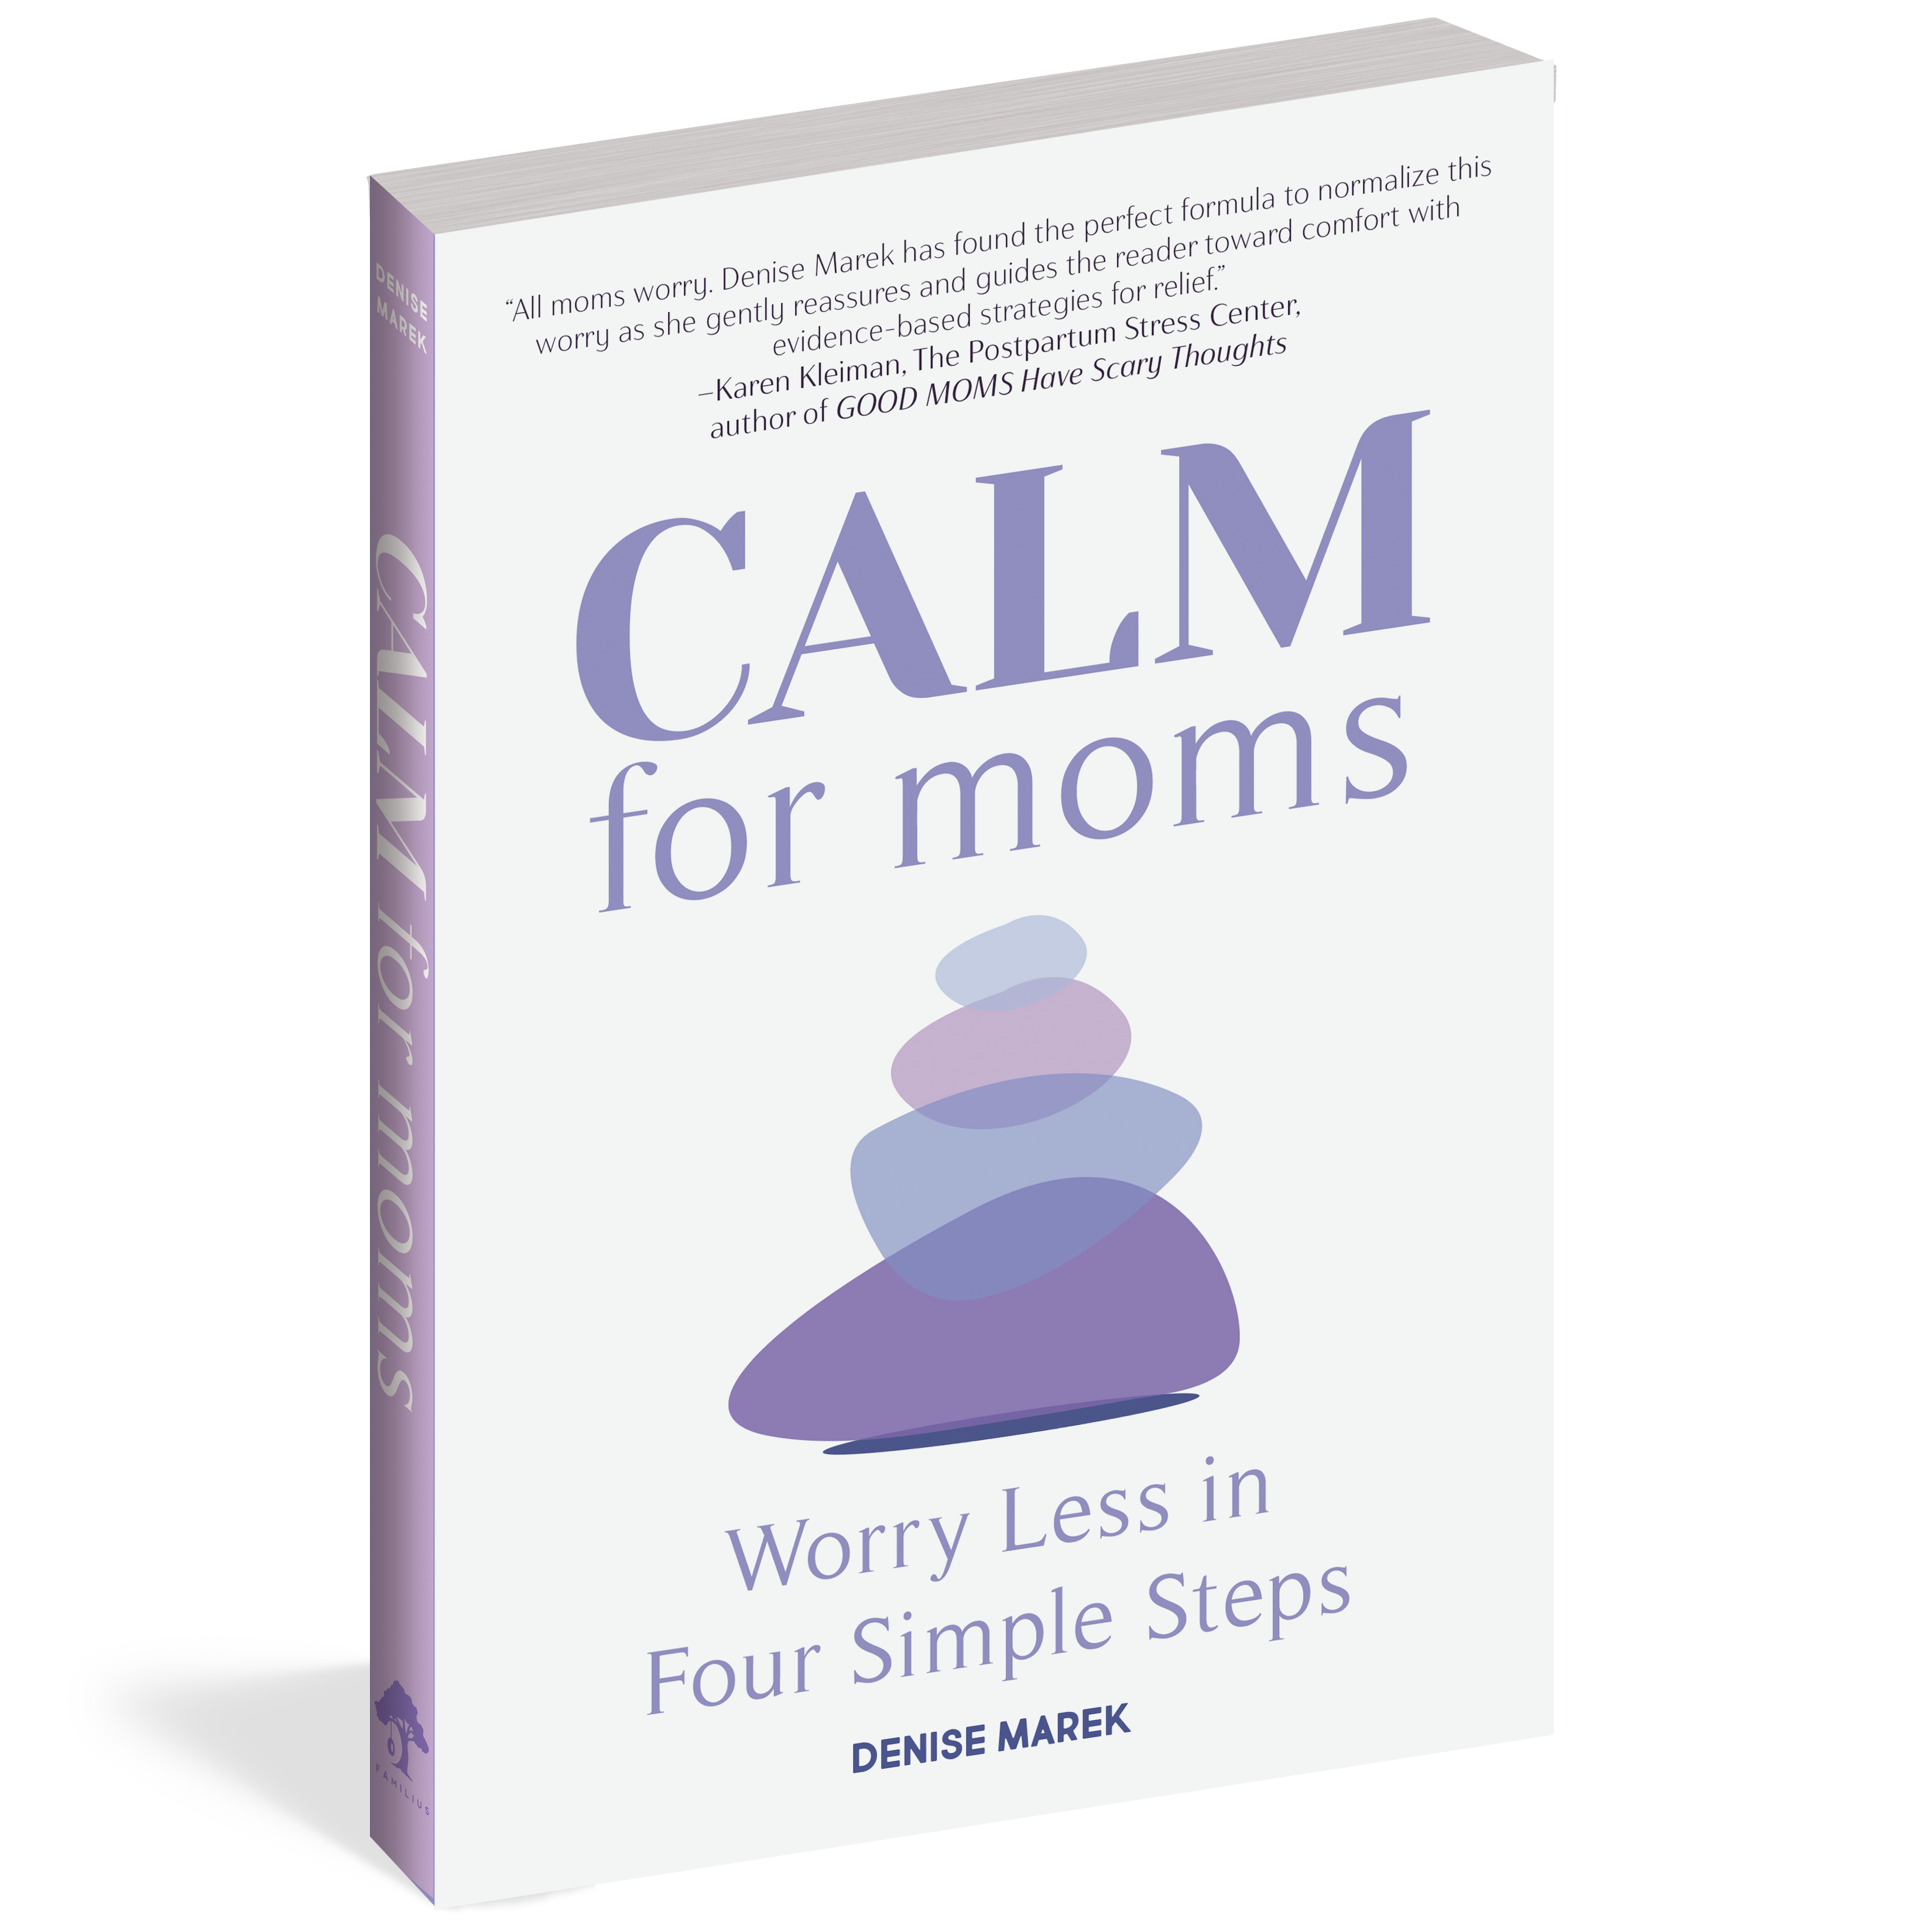 The cover of the book CALM for Moms.